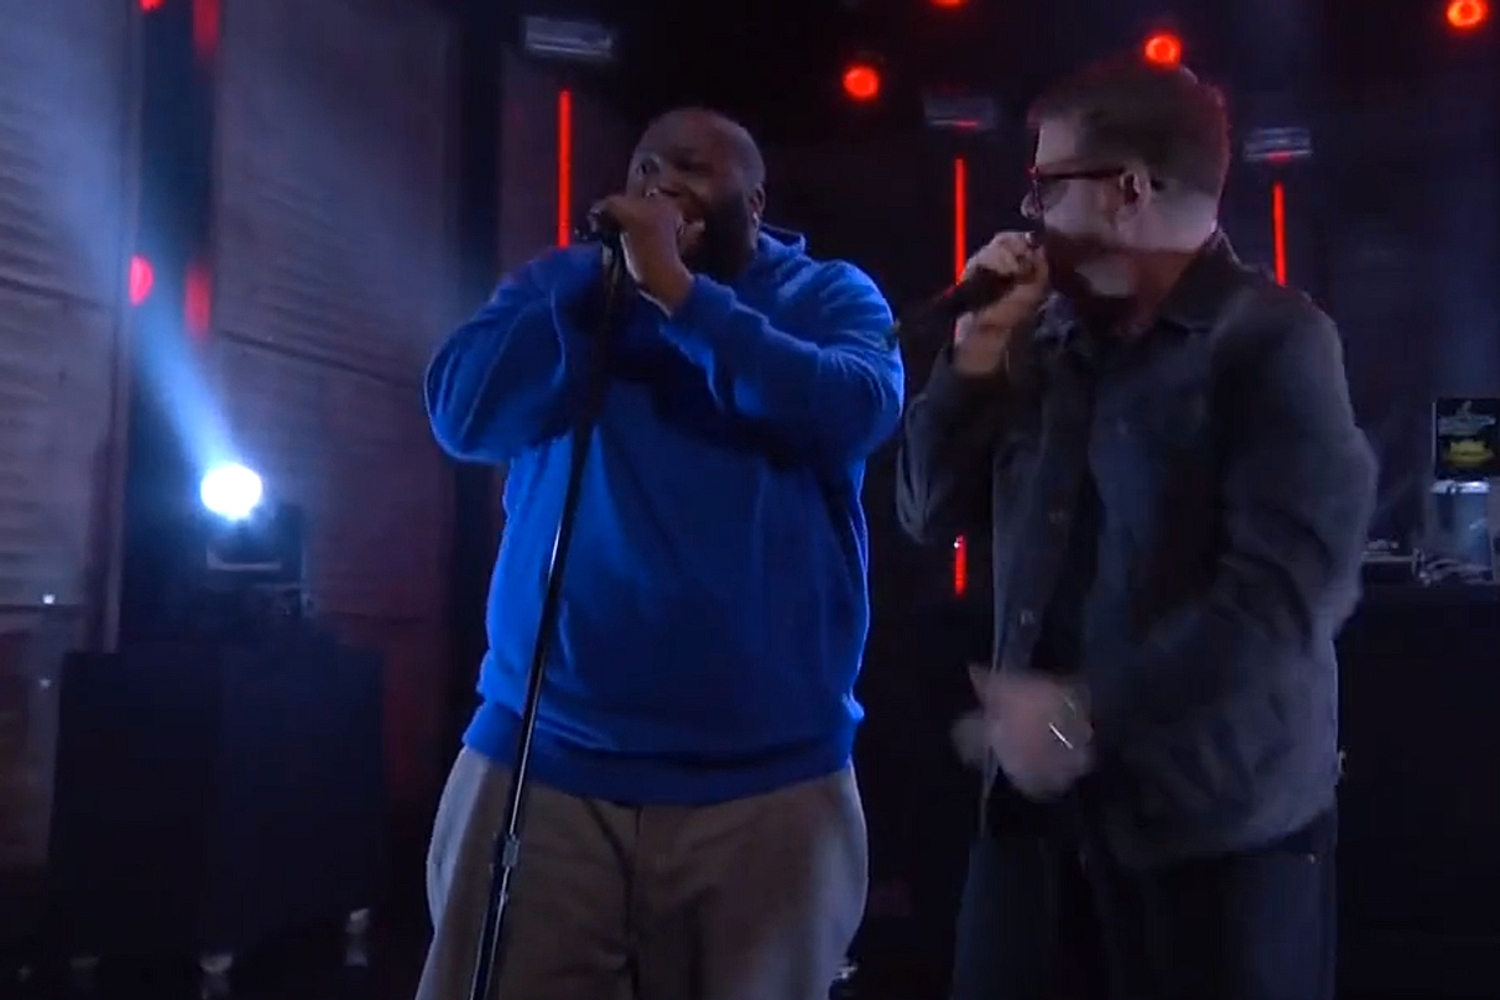 Watch Run the Jewels play ‘Lie, Cheat, Steal’ on Conan